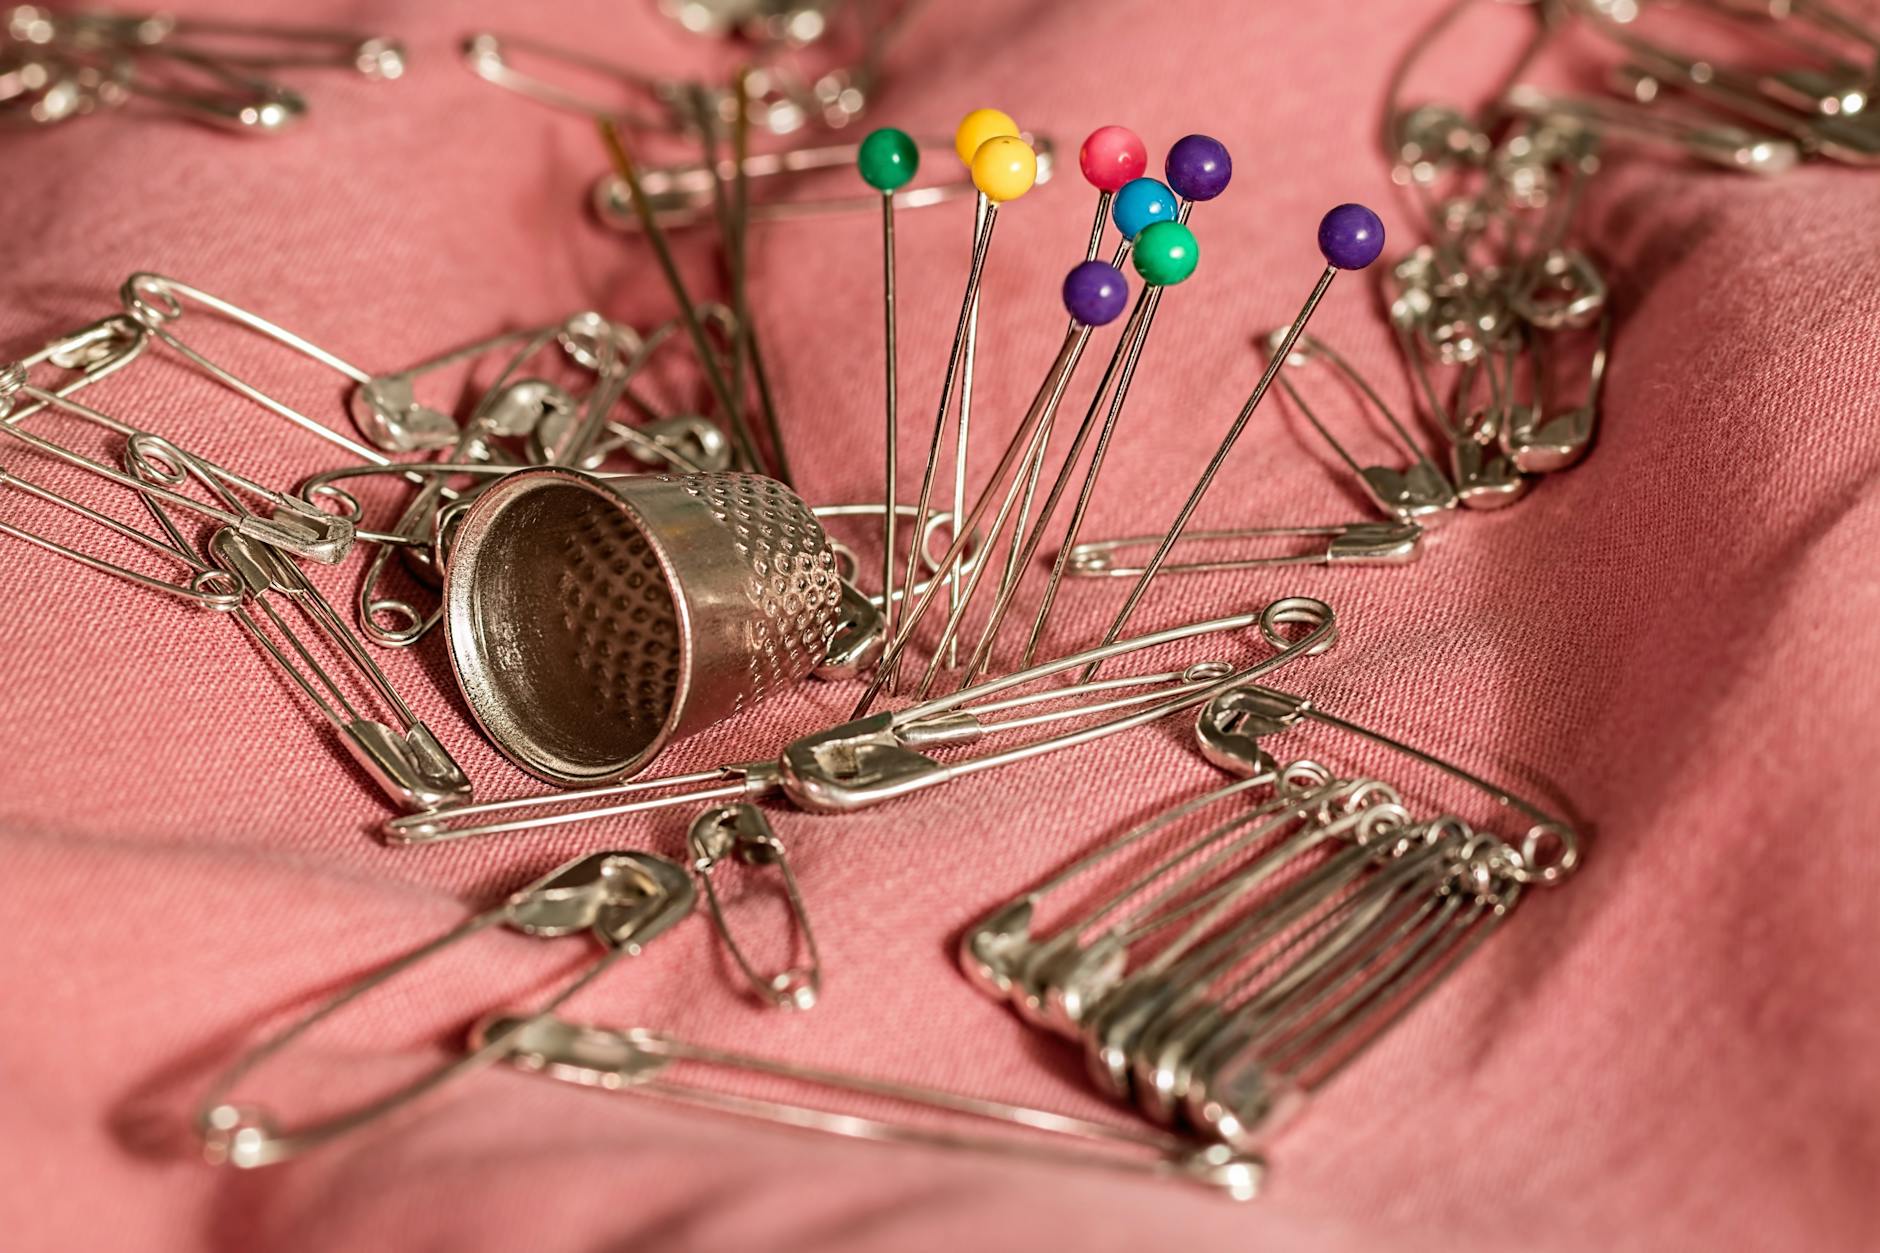 Thimble| Basic Sewing Supplies : What You Need To Get Started| See More At://sewing.com/basic-sewing-supplies-what-you-need-to-get-started/